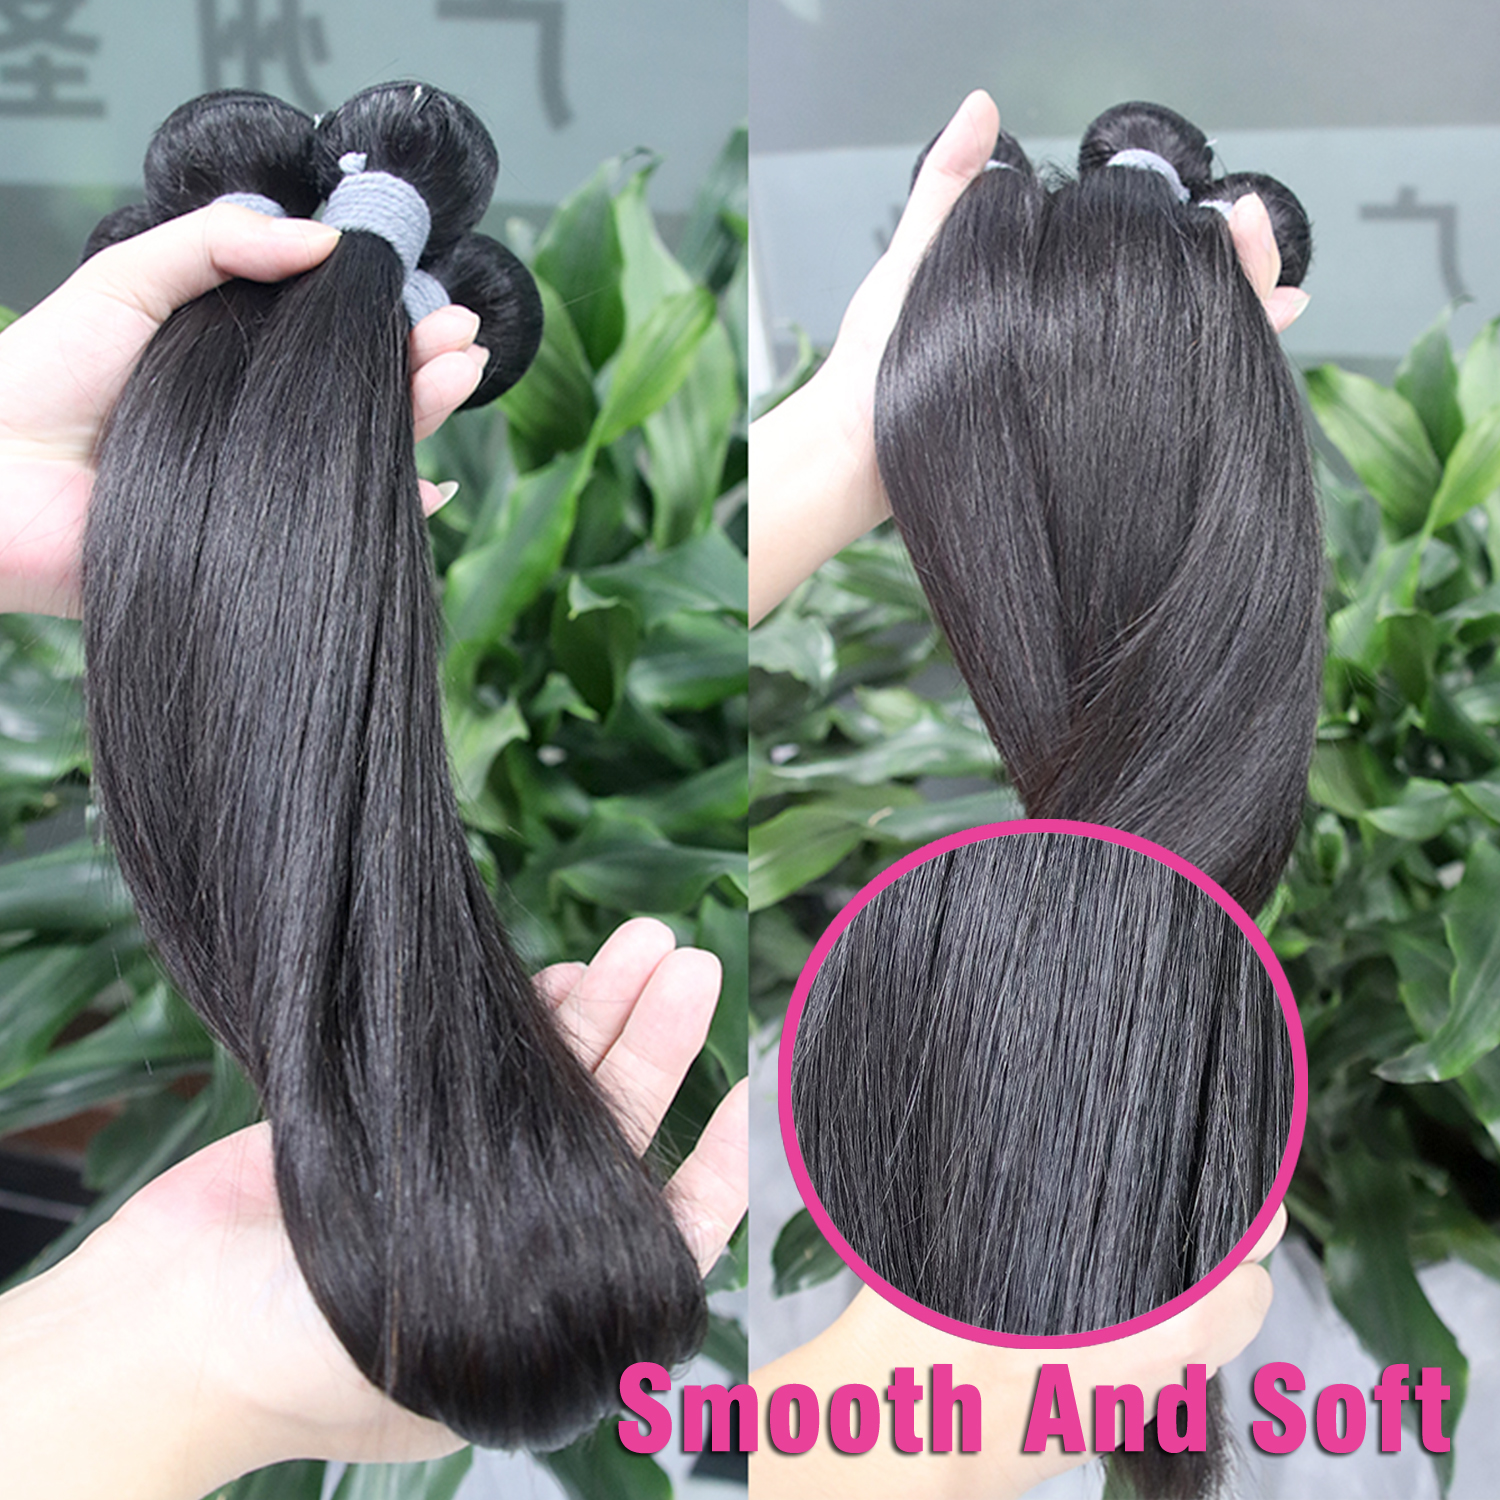 Wholesale Best Human Hair Extensions